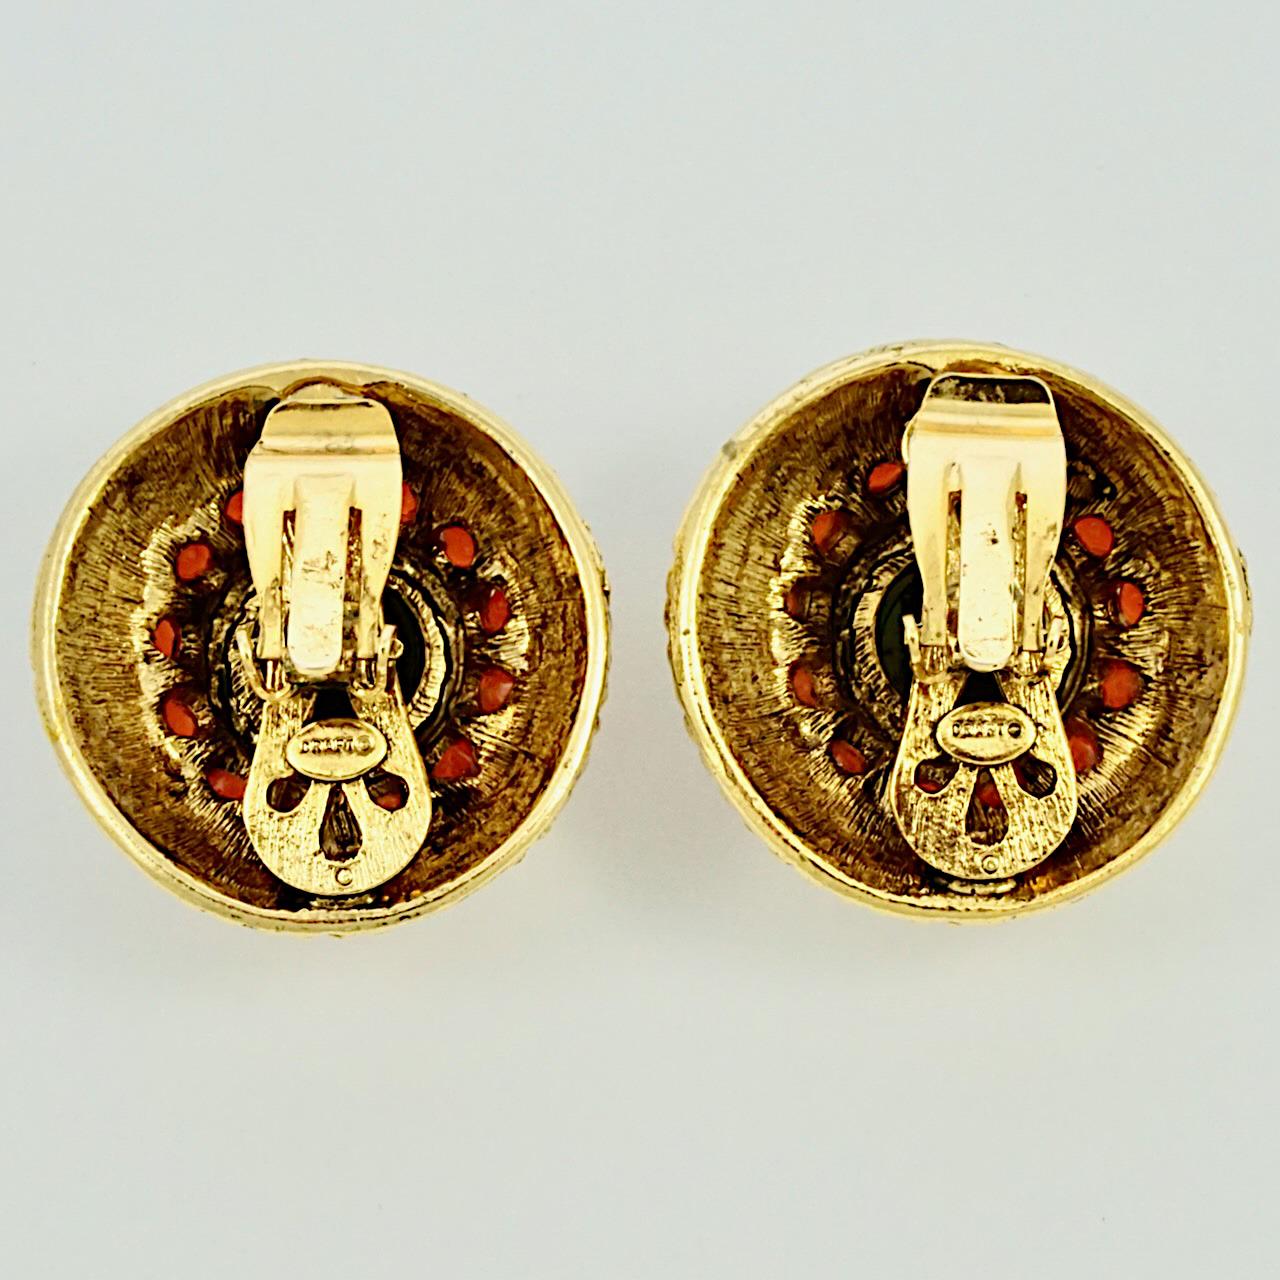 Gem-Craft signed Craft gold plated dome clip on earrings, decorated with mini gold domes, and featuring lovely black and burnt orange glass stones. Measuring diameter 3.35 cm / 1.3 inches.

This is a beautiful pair of designer earrings, circa 1980s. 